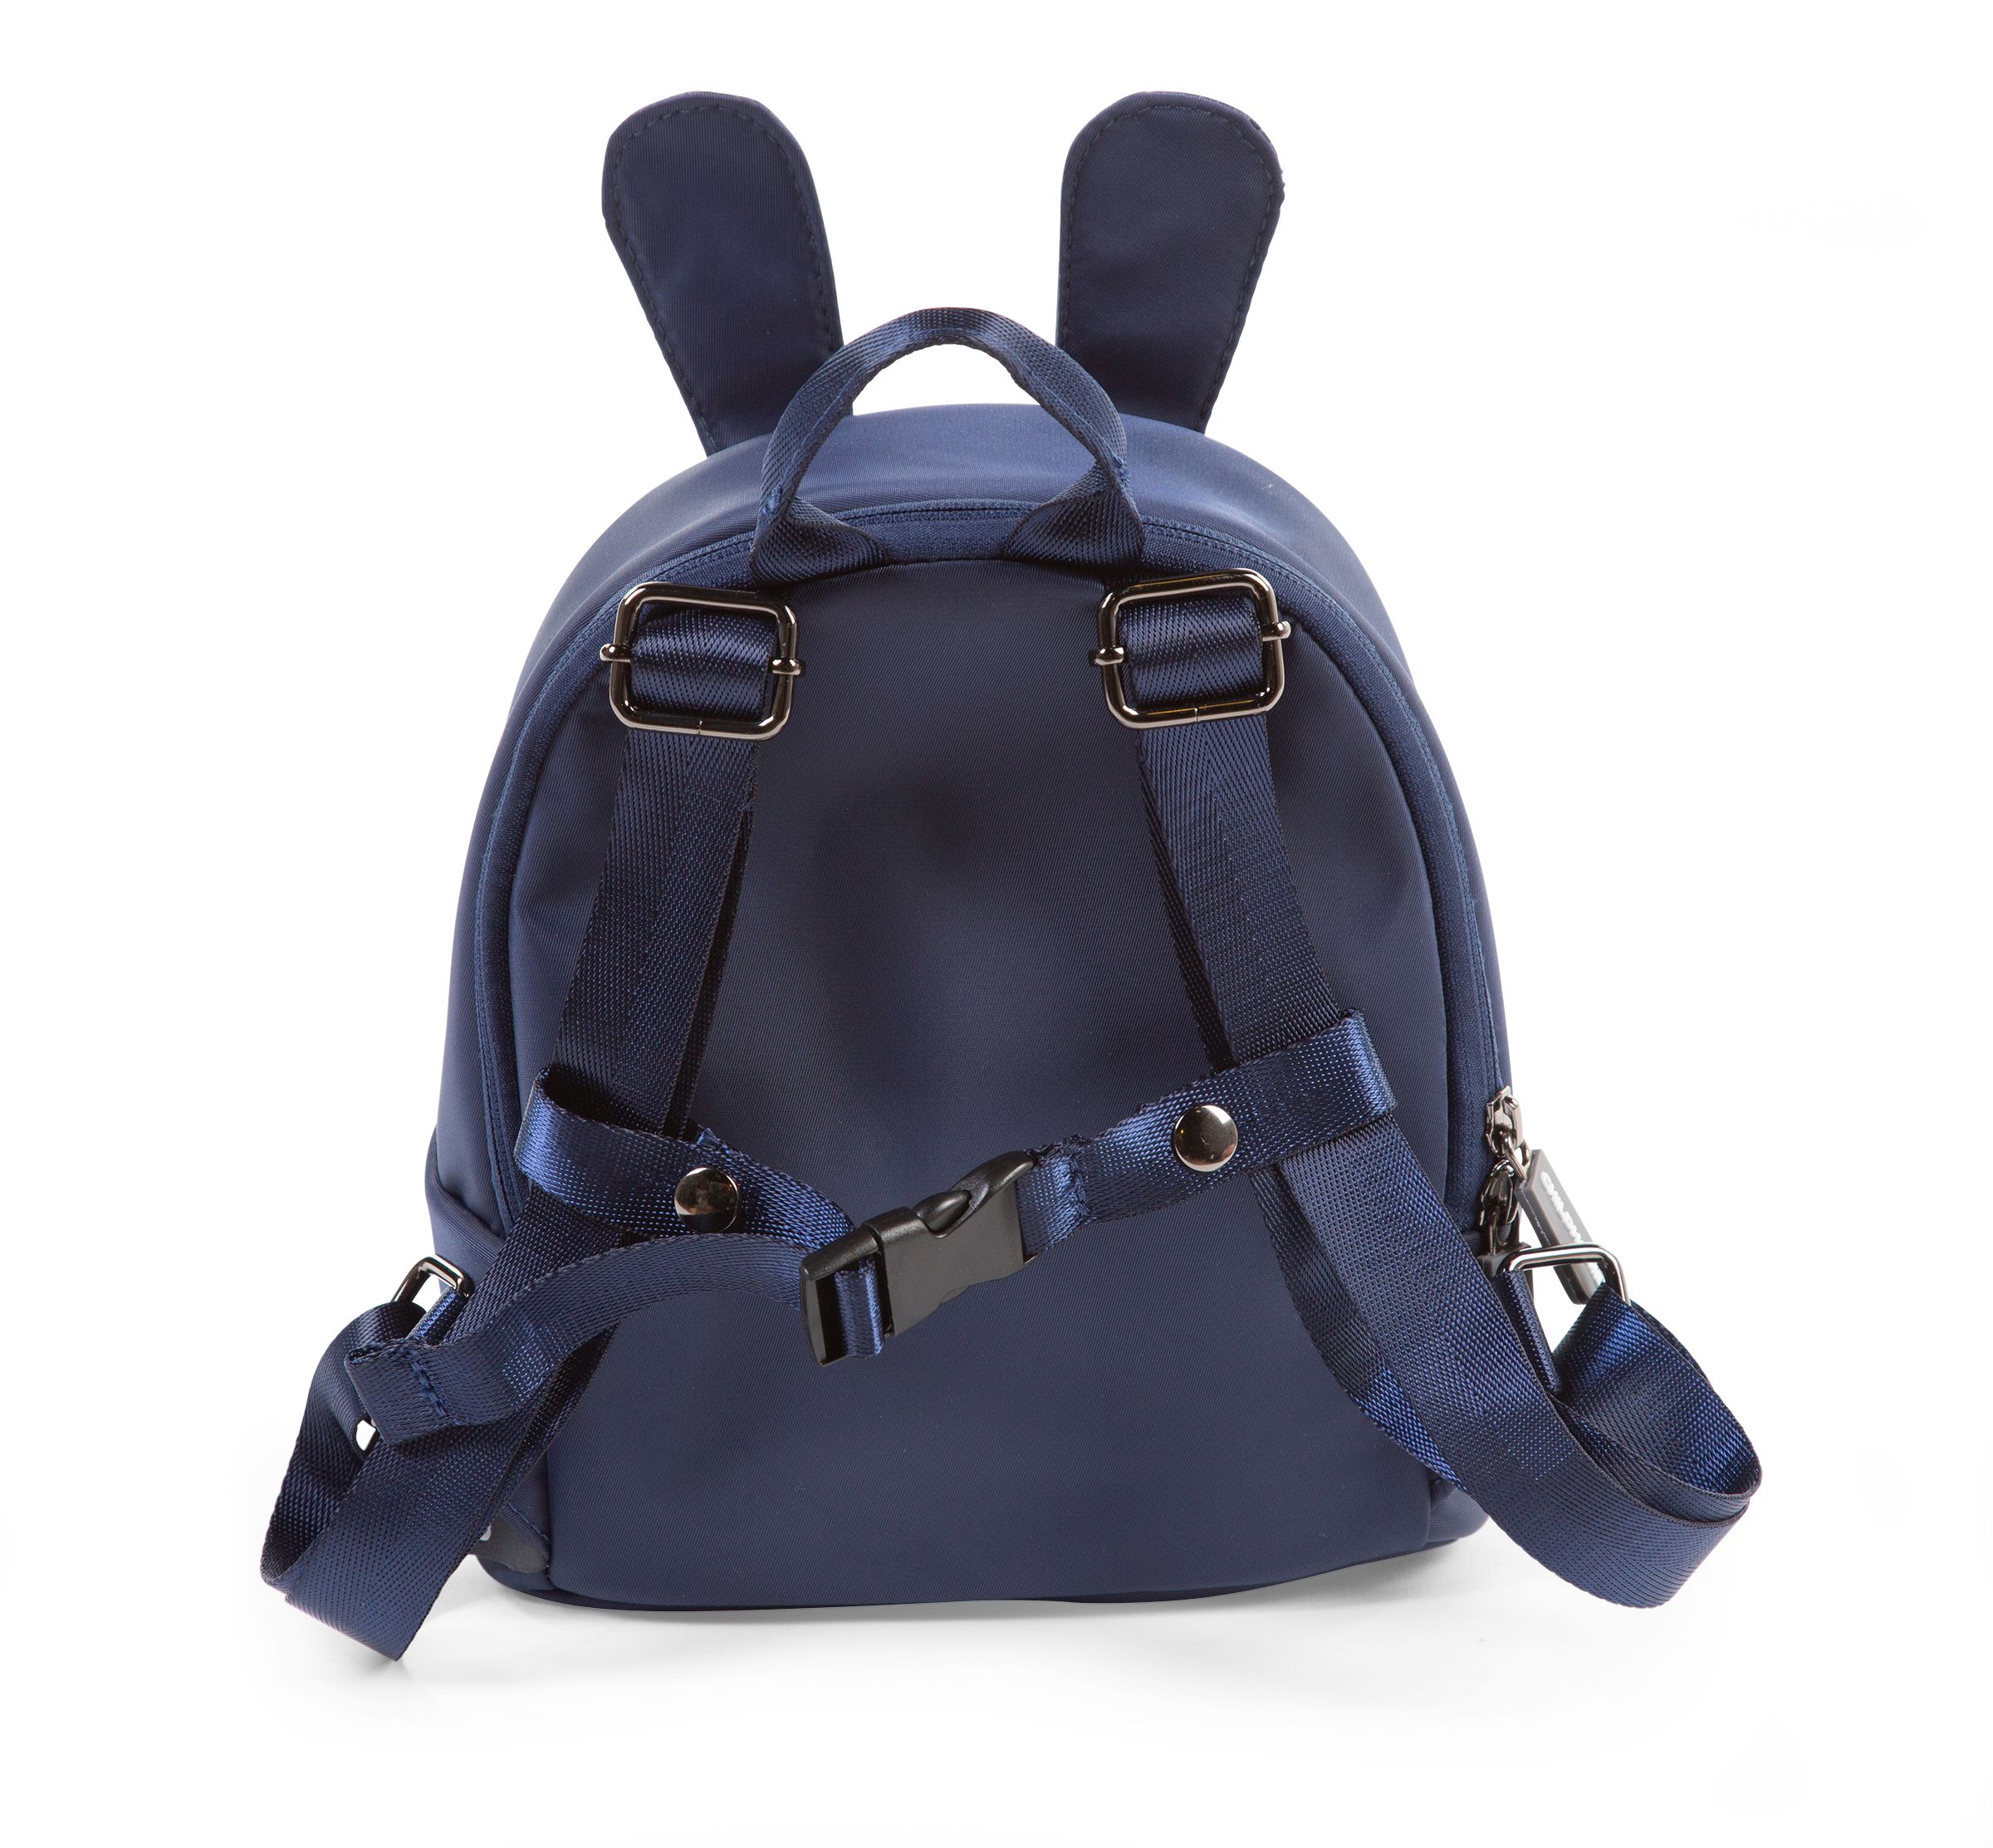 My First Bag Children's Backpack - Navy - MyLullaby